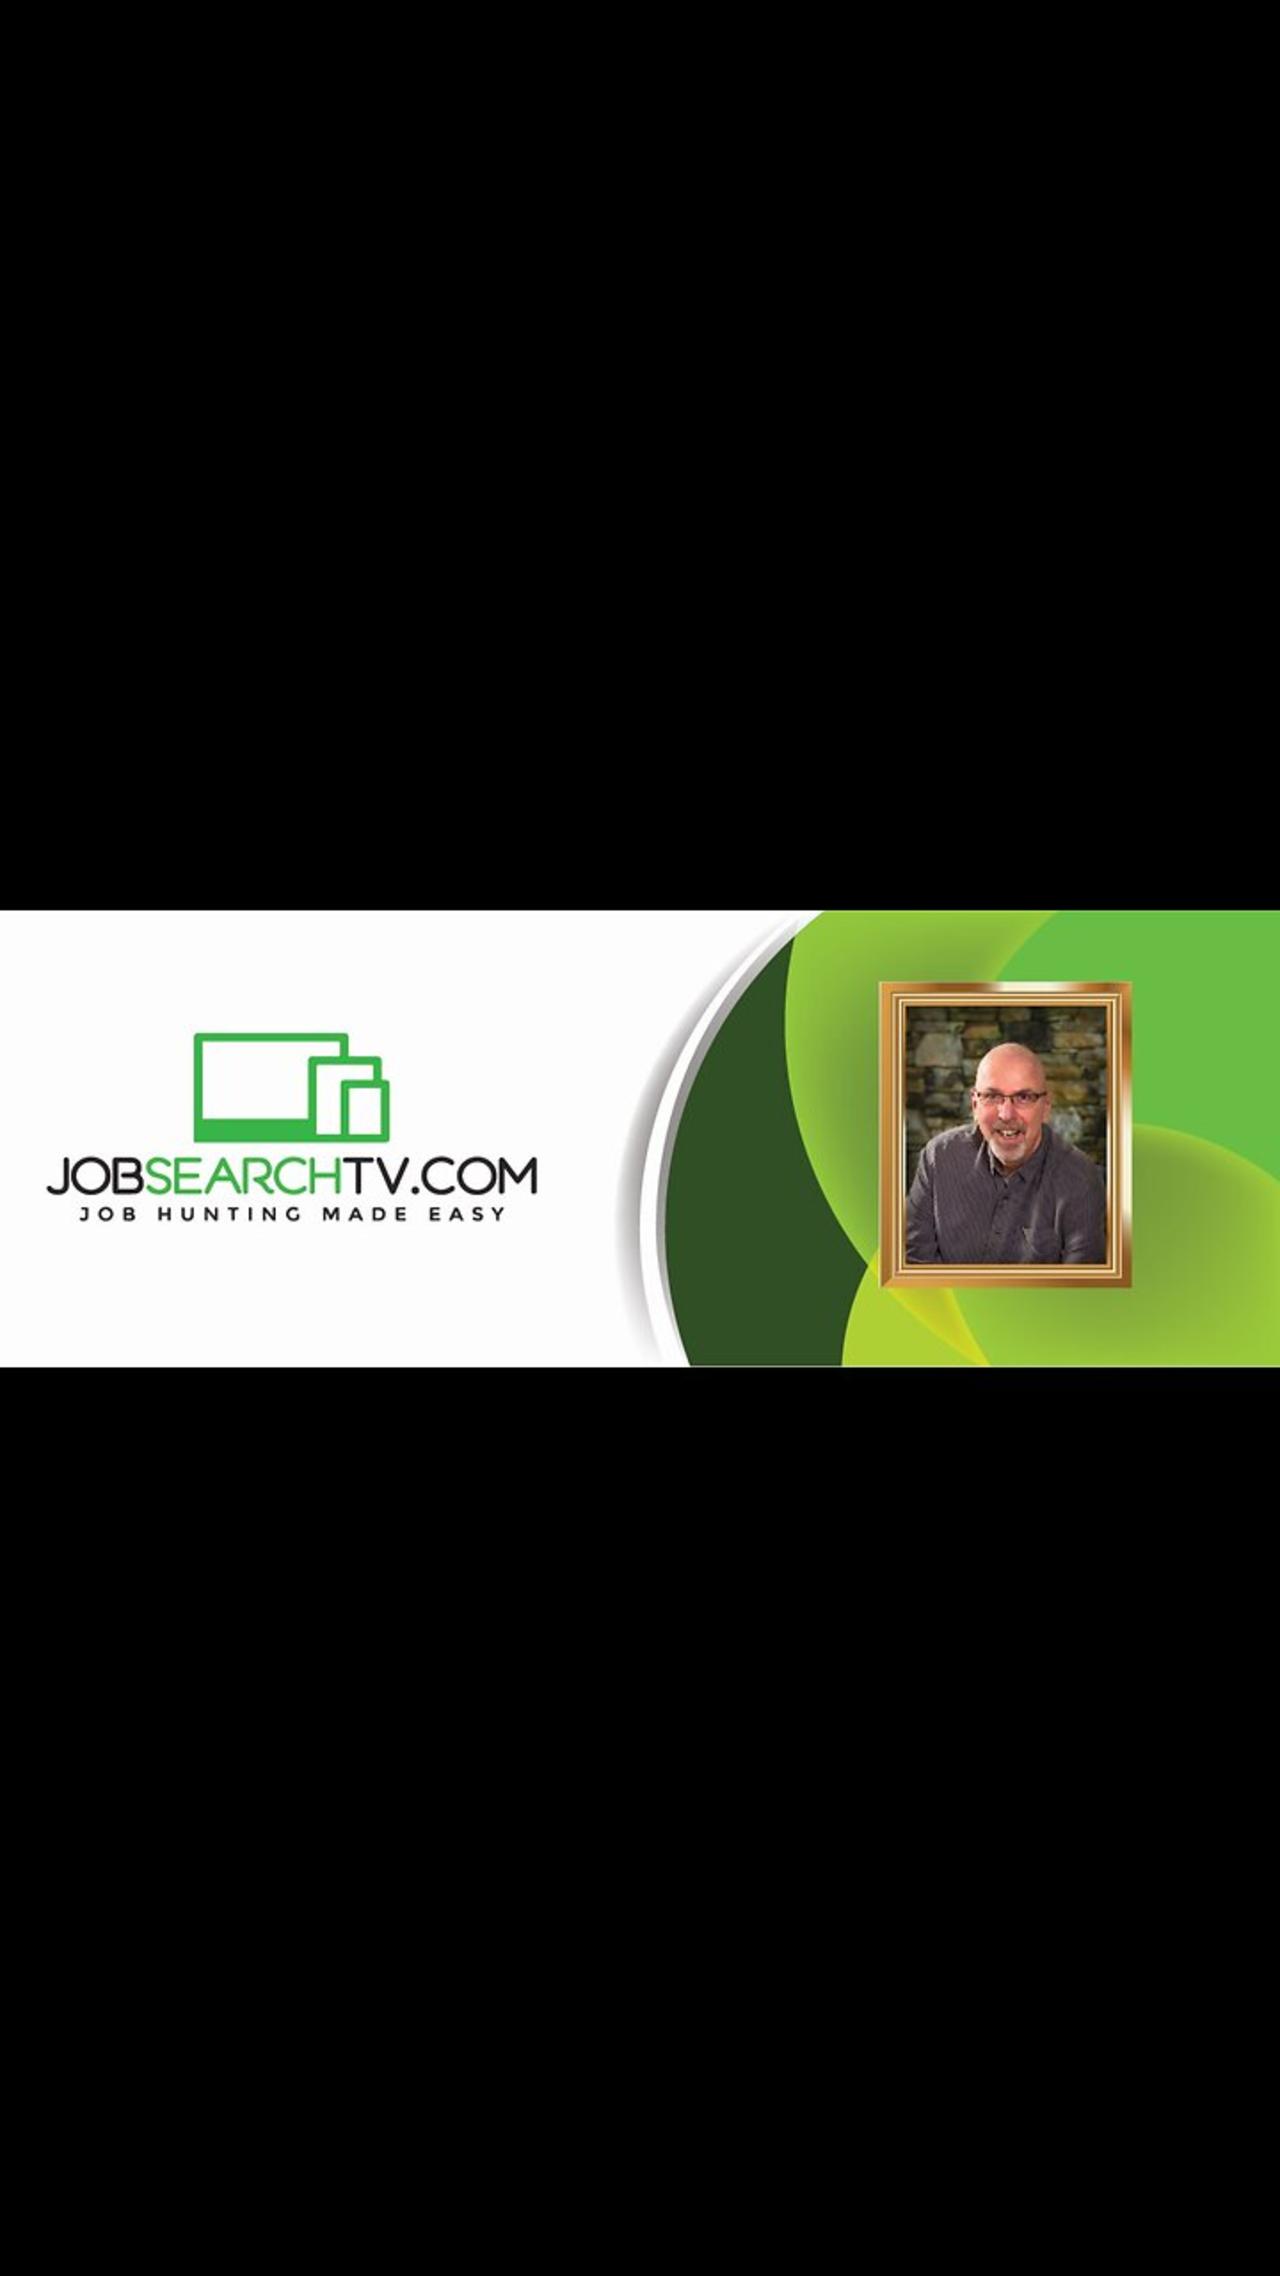 Live Job Search Q&A with Marty Gilbert | JobSearchTV.com